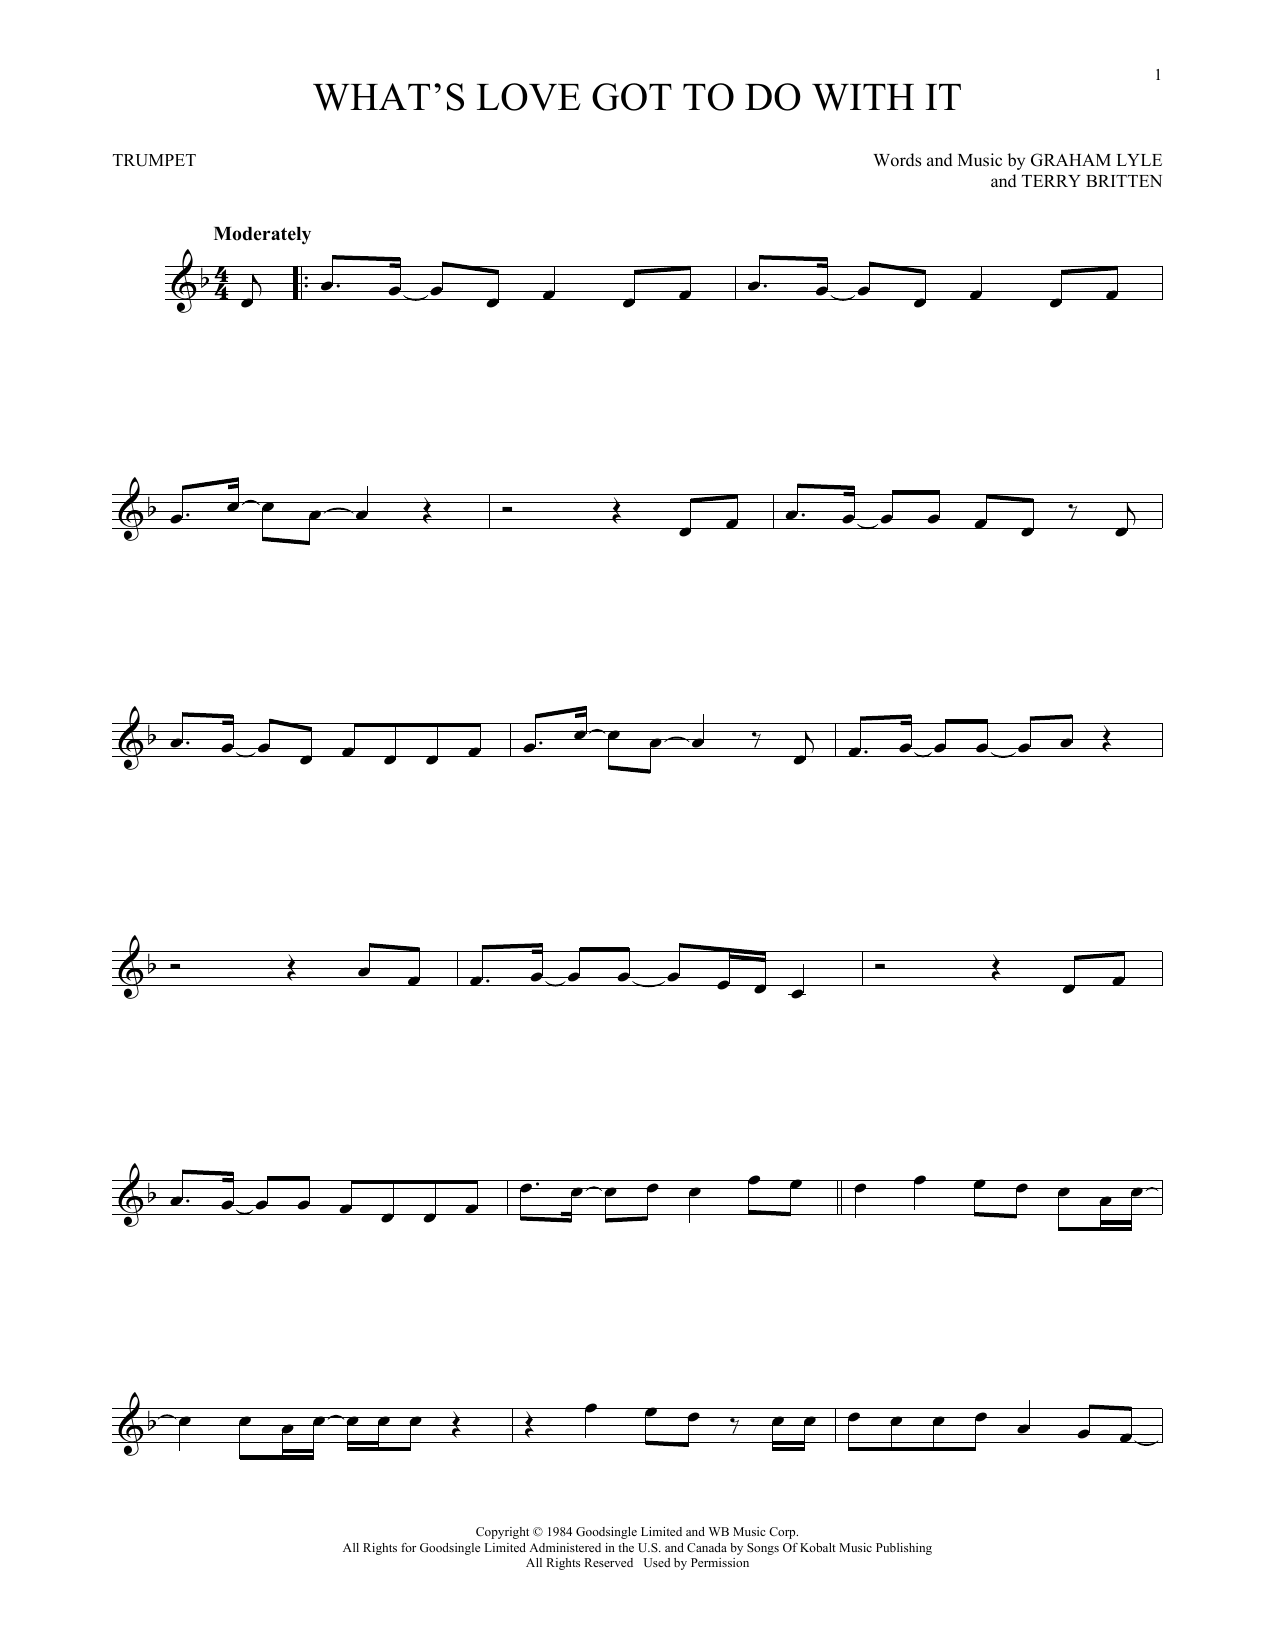 Download Tina Turner What's Love Got To Do With It Sheet Music